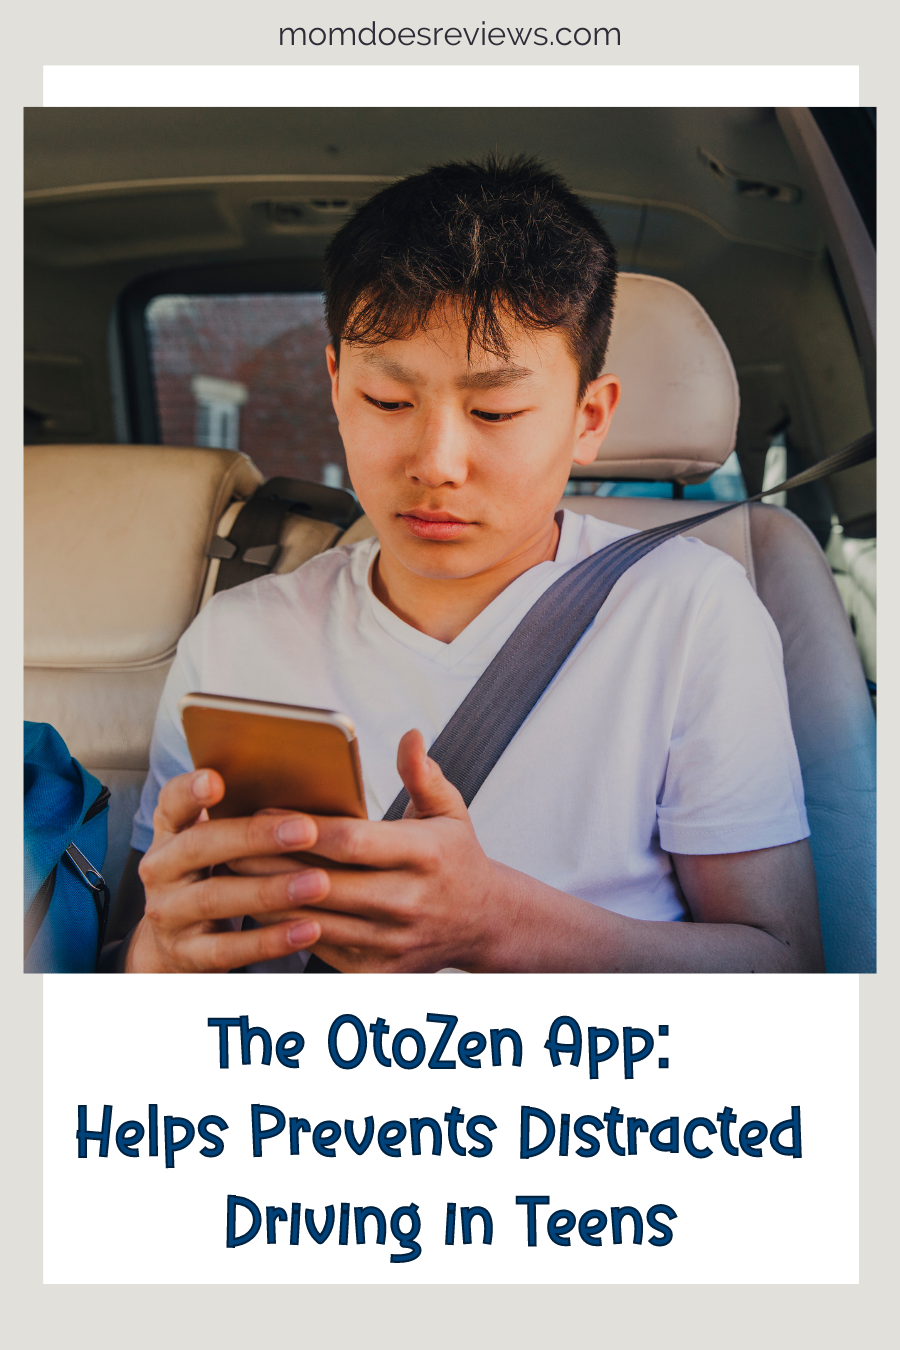 Role of OtoZen App in Preventing Distracted Driving for Teens